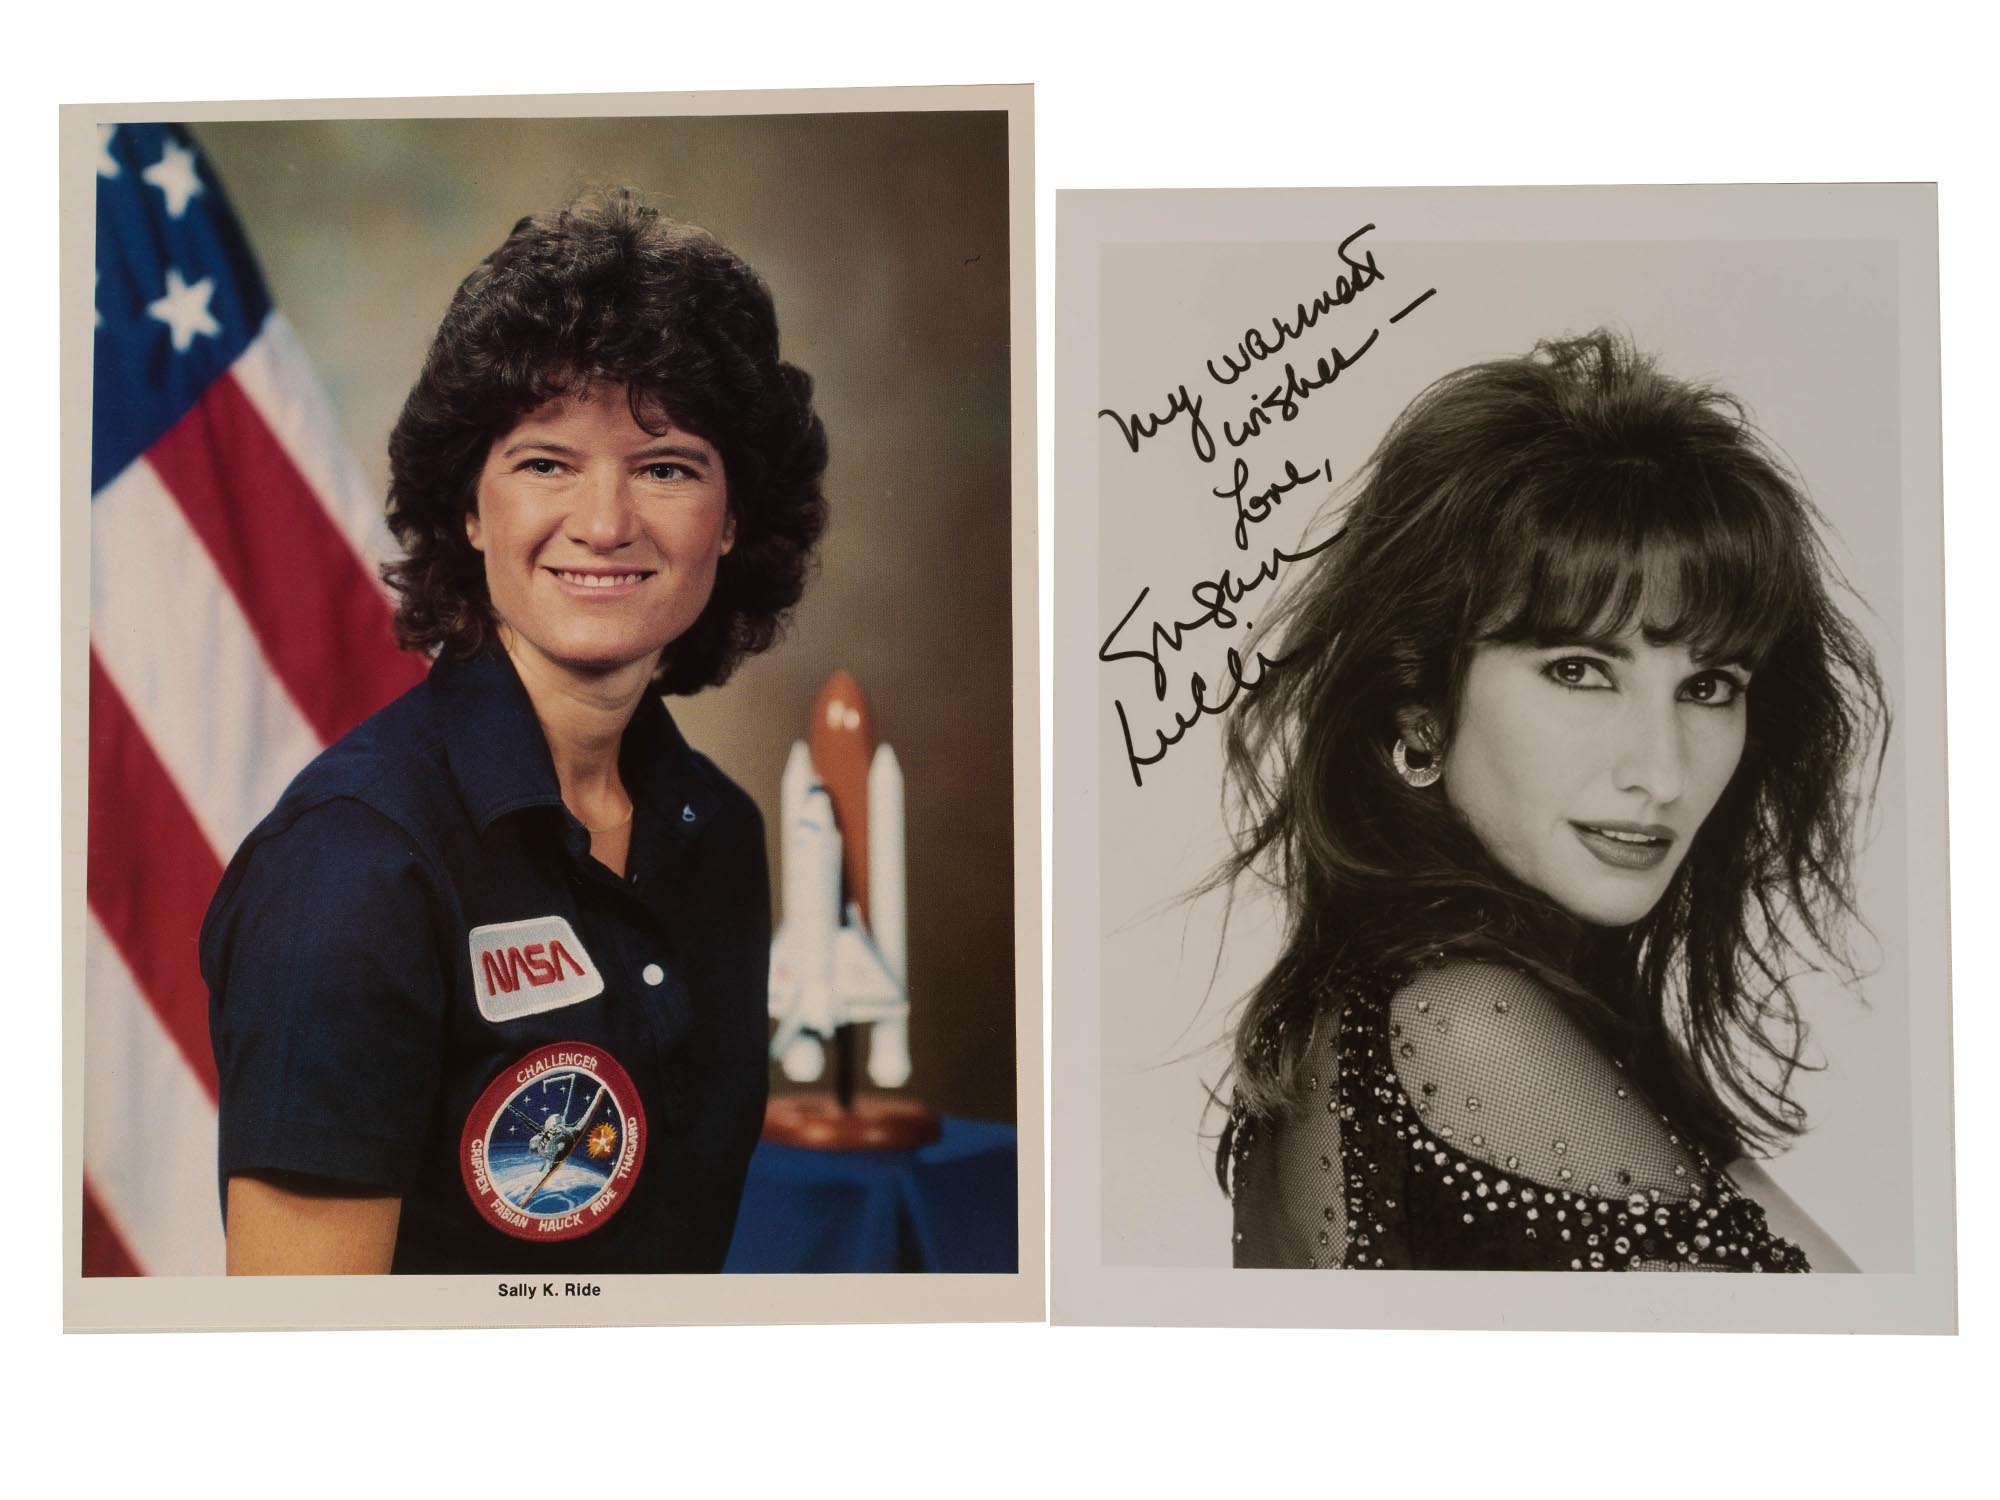 DONNA KARAN AND OTHER CELEBRITIES AUTOGRAPHS LOT PIC-3